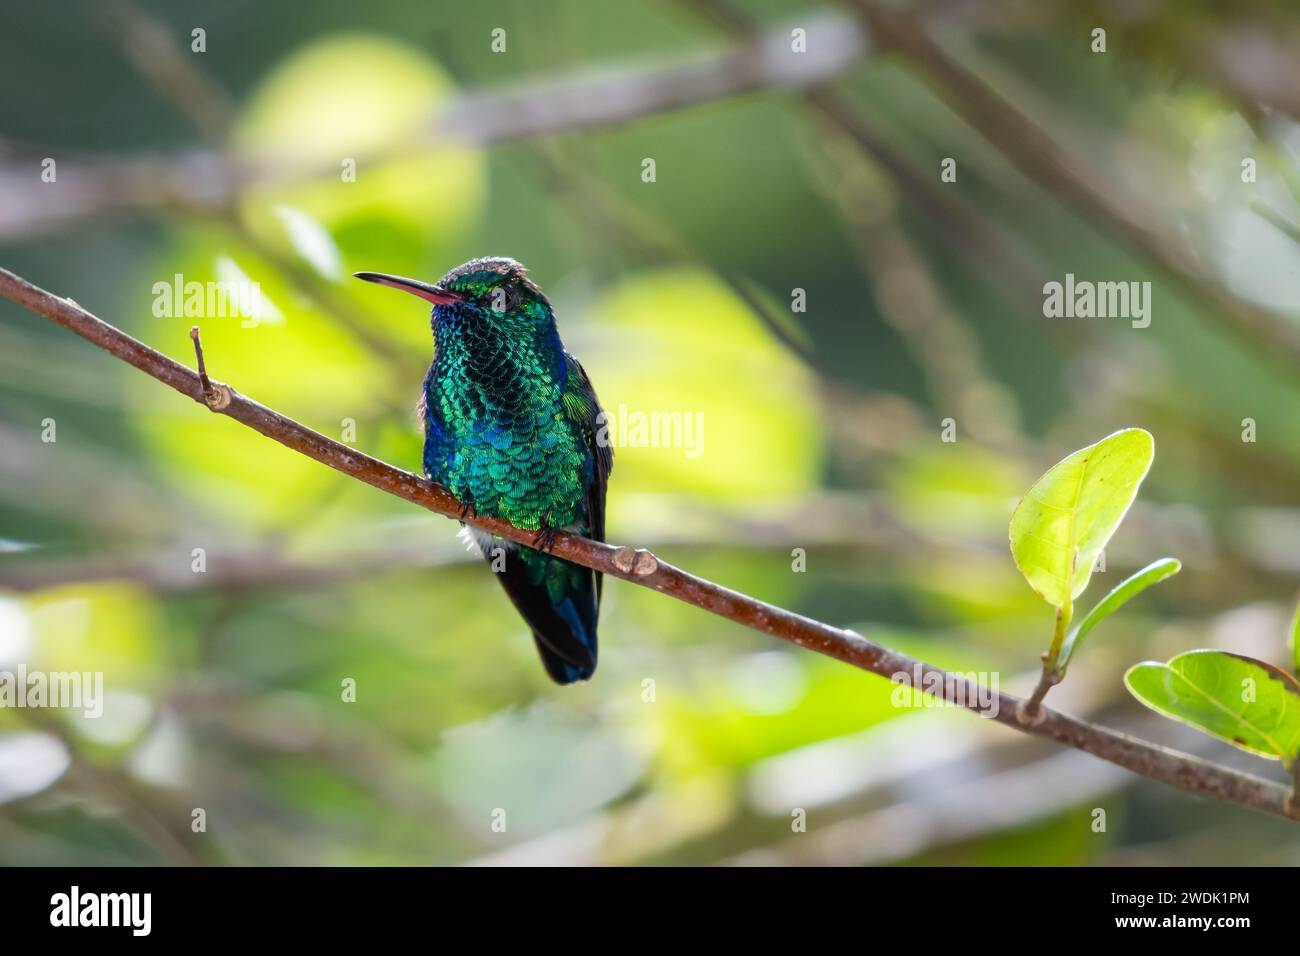 Blue-chinned Sapphire hummingbird, Chlorestes notata, with iridescent feathers resting in the rainforest of Trinidad and Tobago Stock Photo